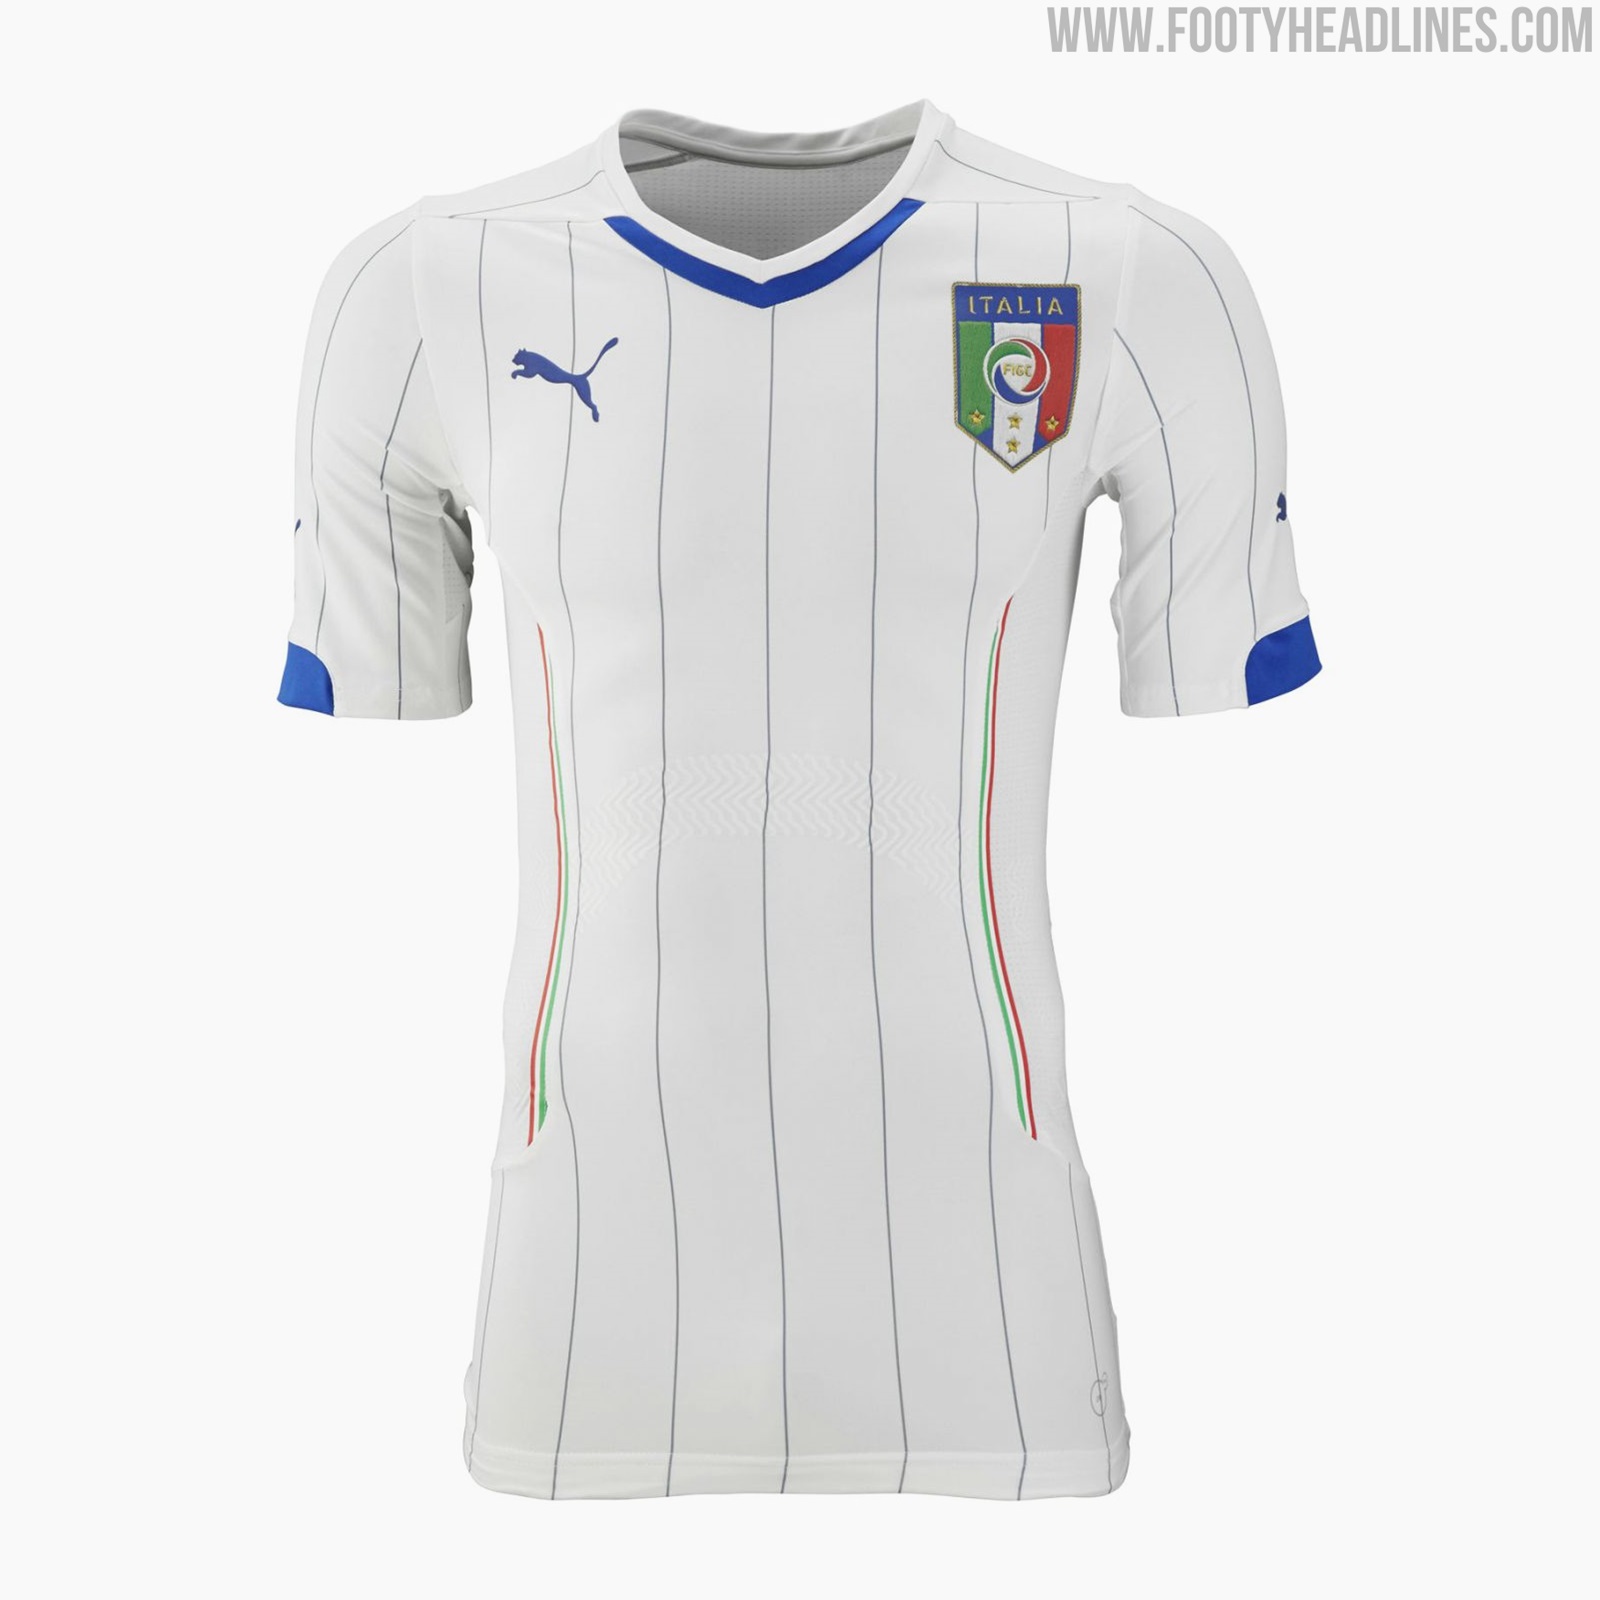 Italy's iconic jerseys through the years